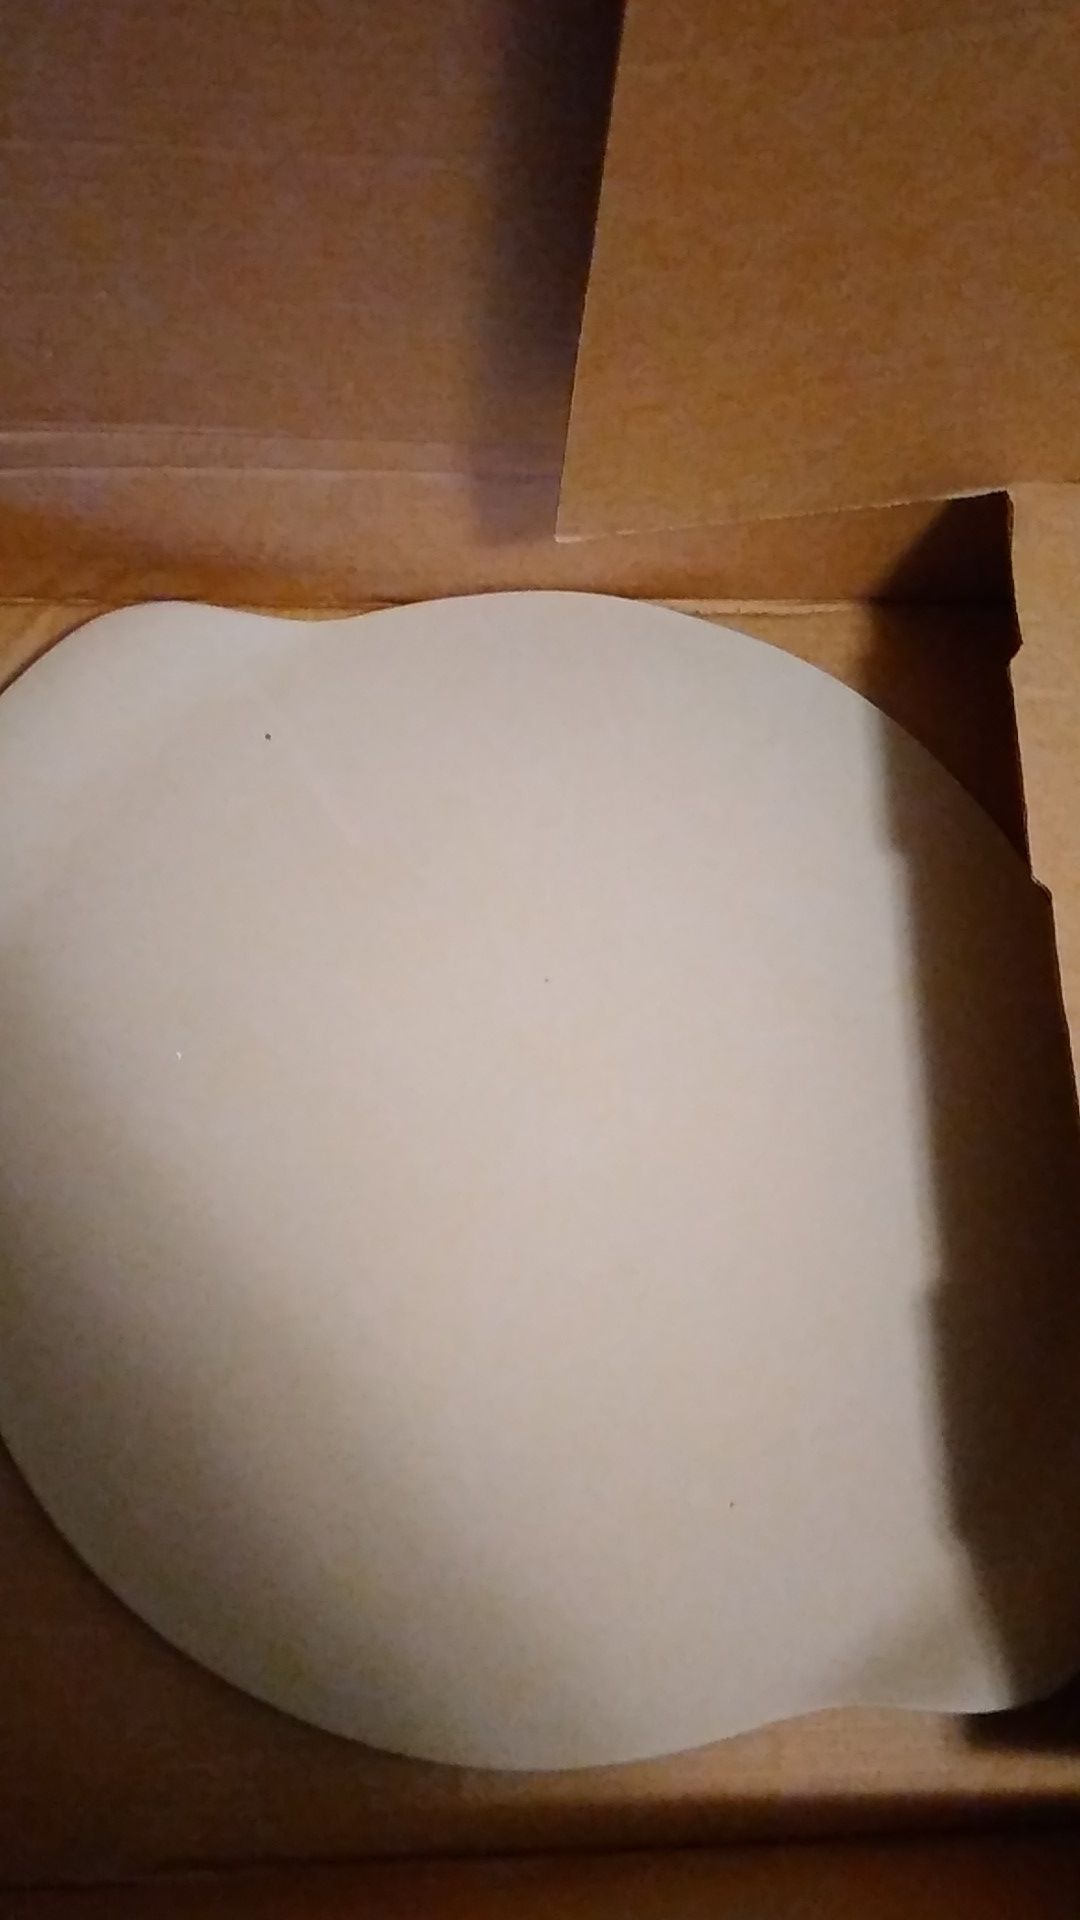 The Pampered Chef Large Round Stone with handles